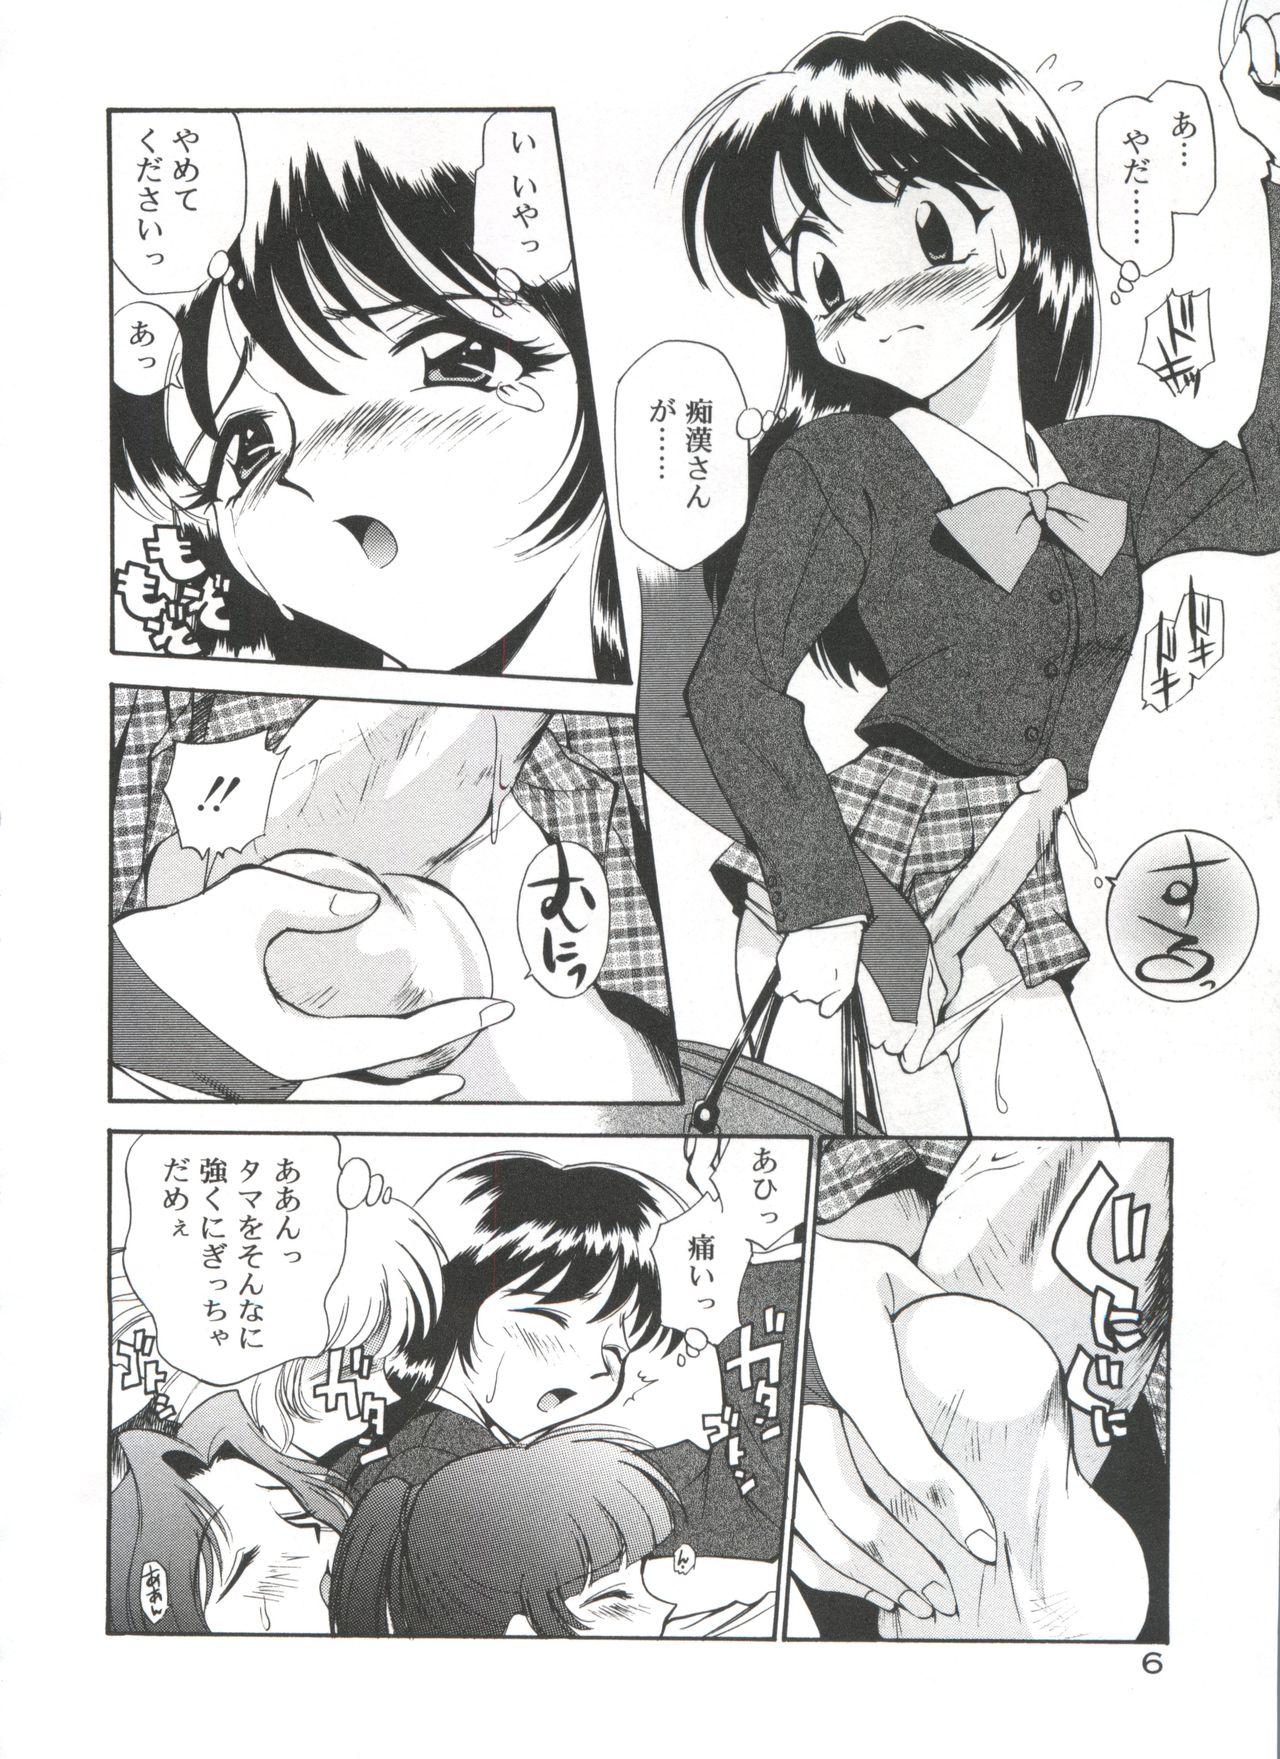 Best Blowjob Anal Justice - Nikubou Shasei Hen Tribute - Page 11